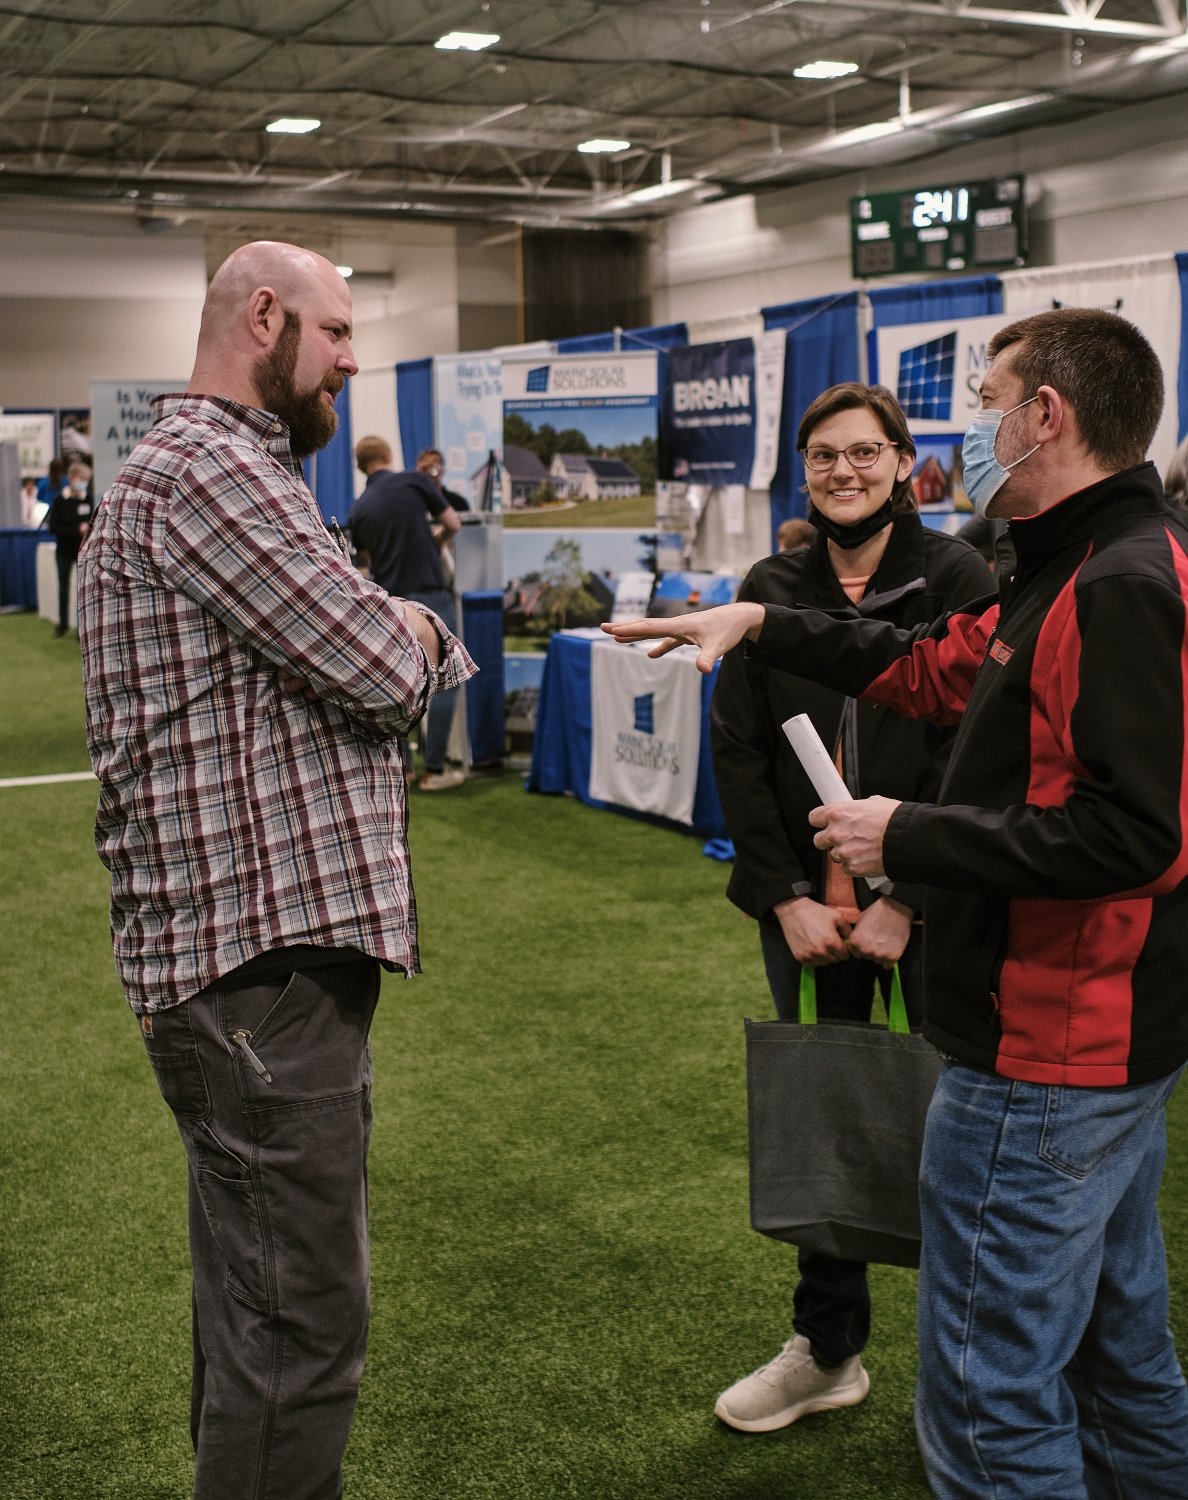 Casco Bay Insulation chats with attendees.